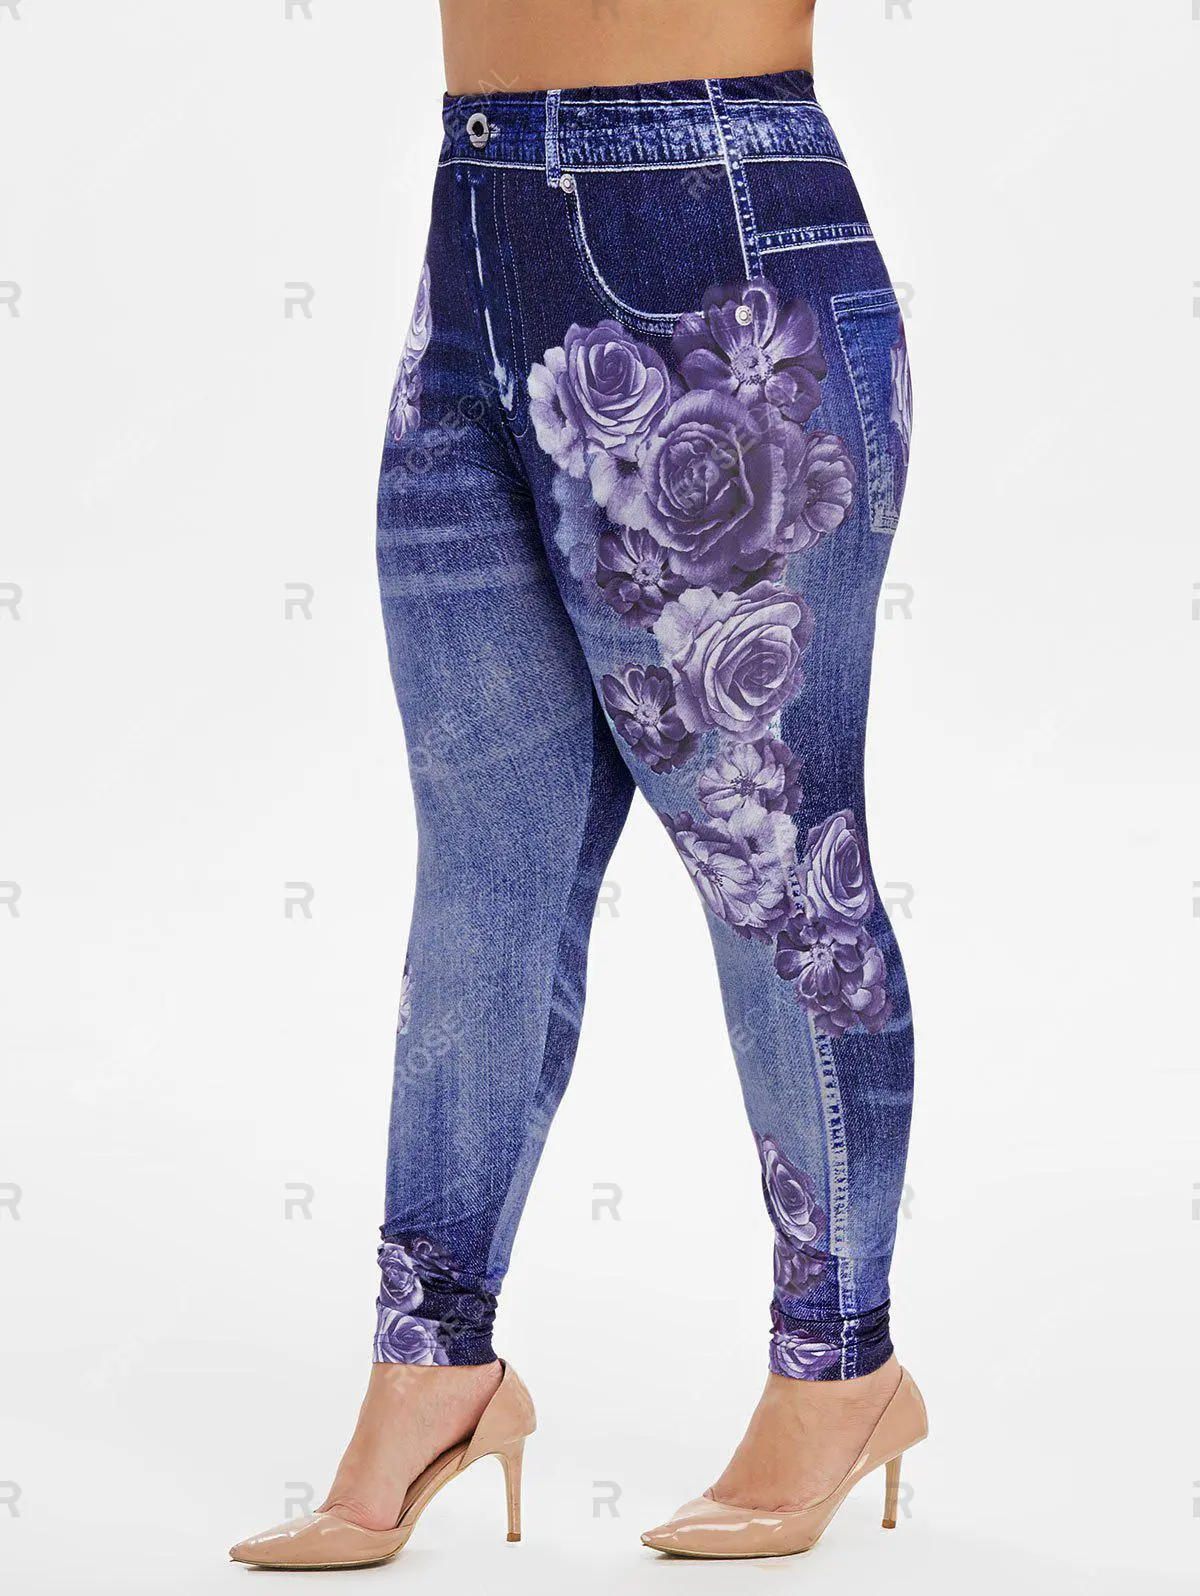 Lavender Ruffled 2 in 1 Tee and Floral Print 3D Jeggings Plus Size Summer Outfit